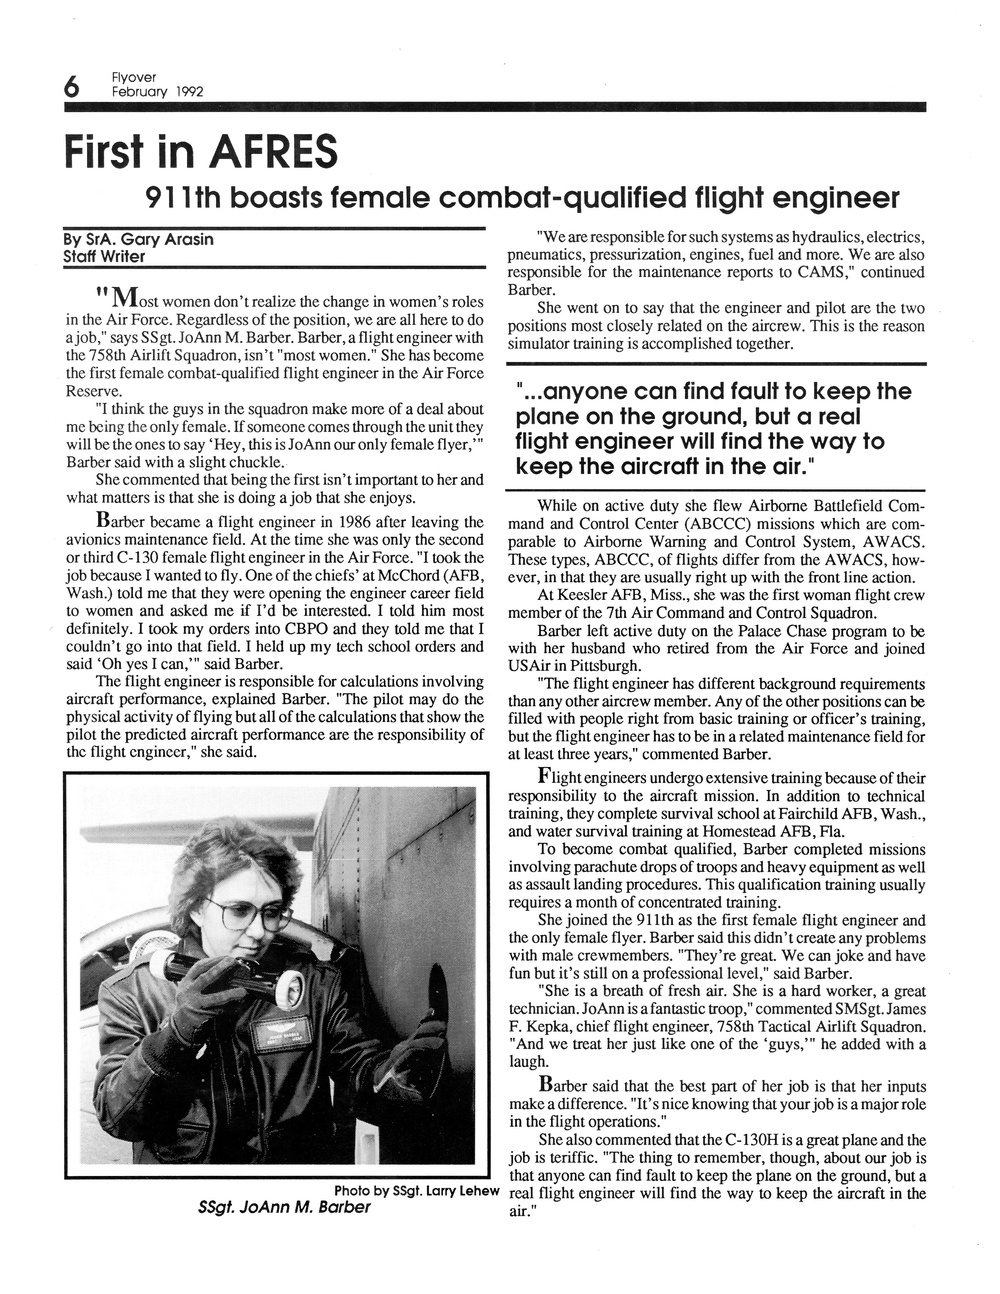 Newspaper Clipping - 911th boasts female combat-qualified flight engineer